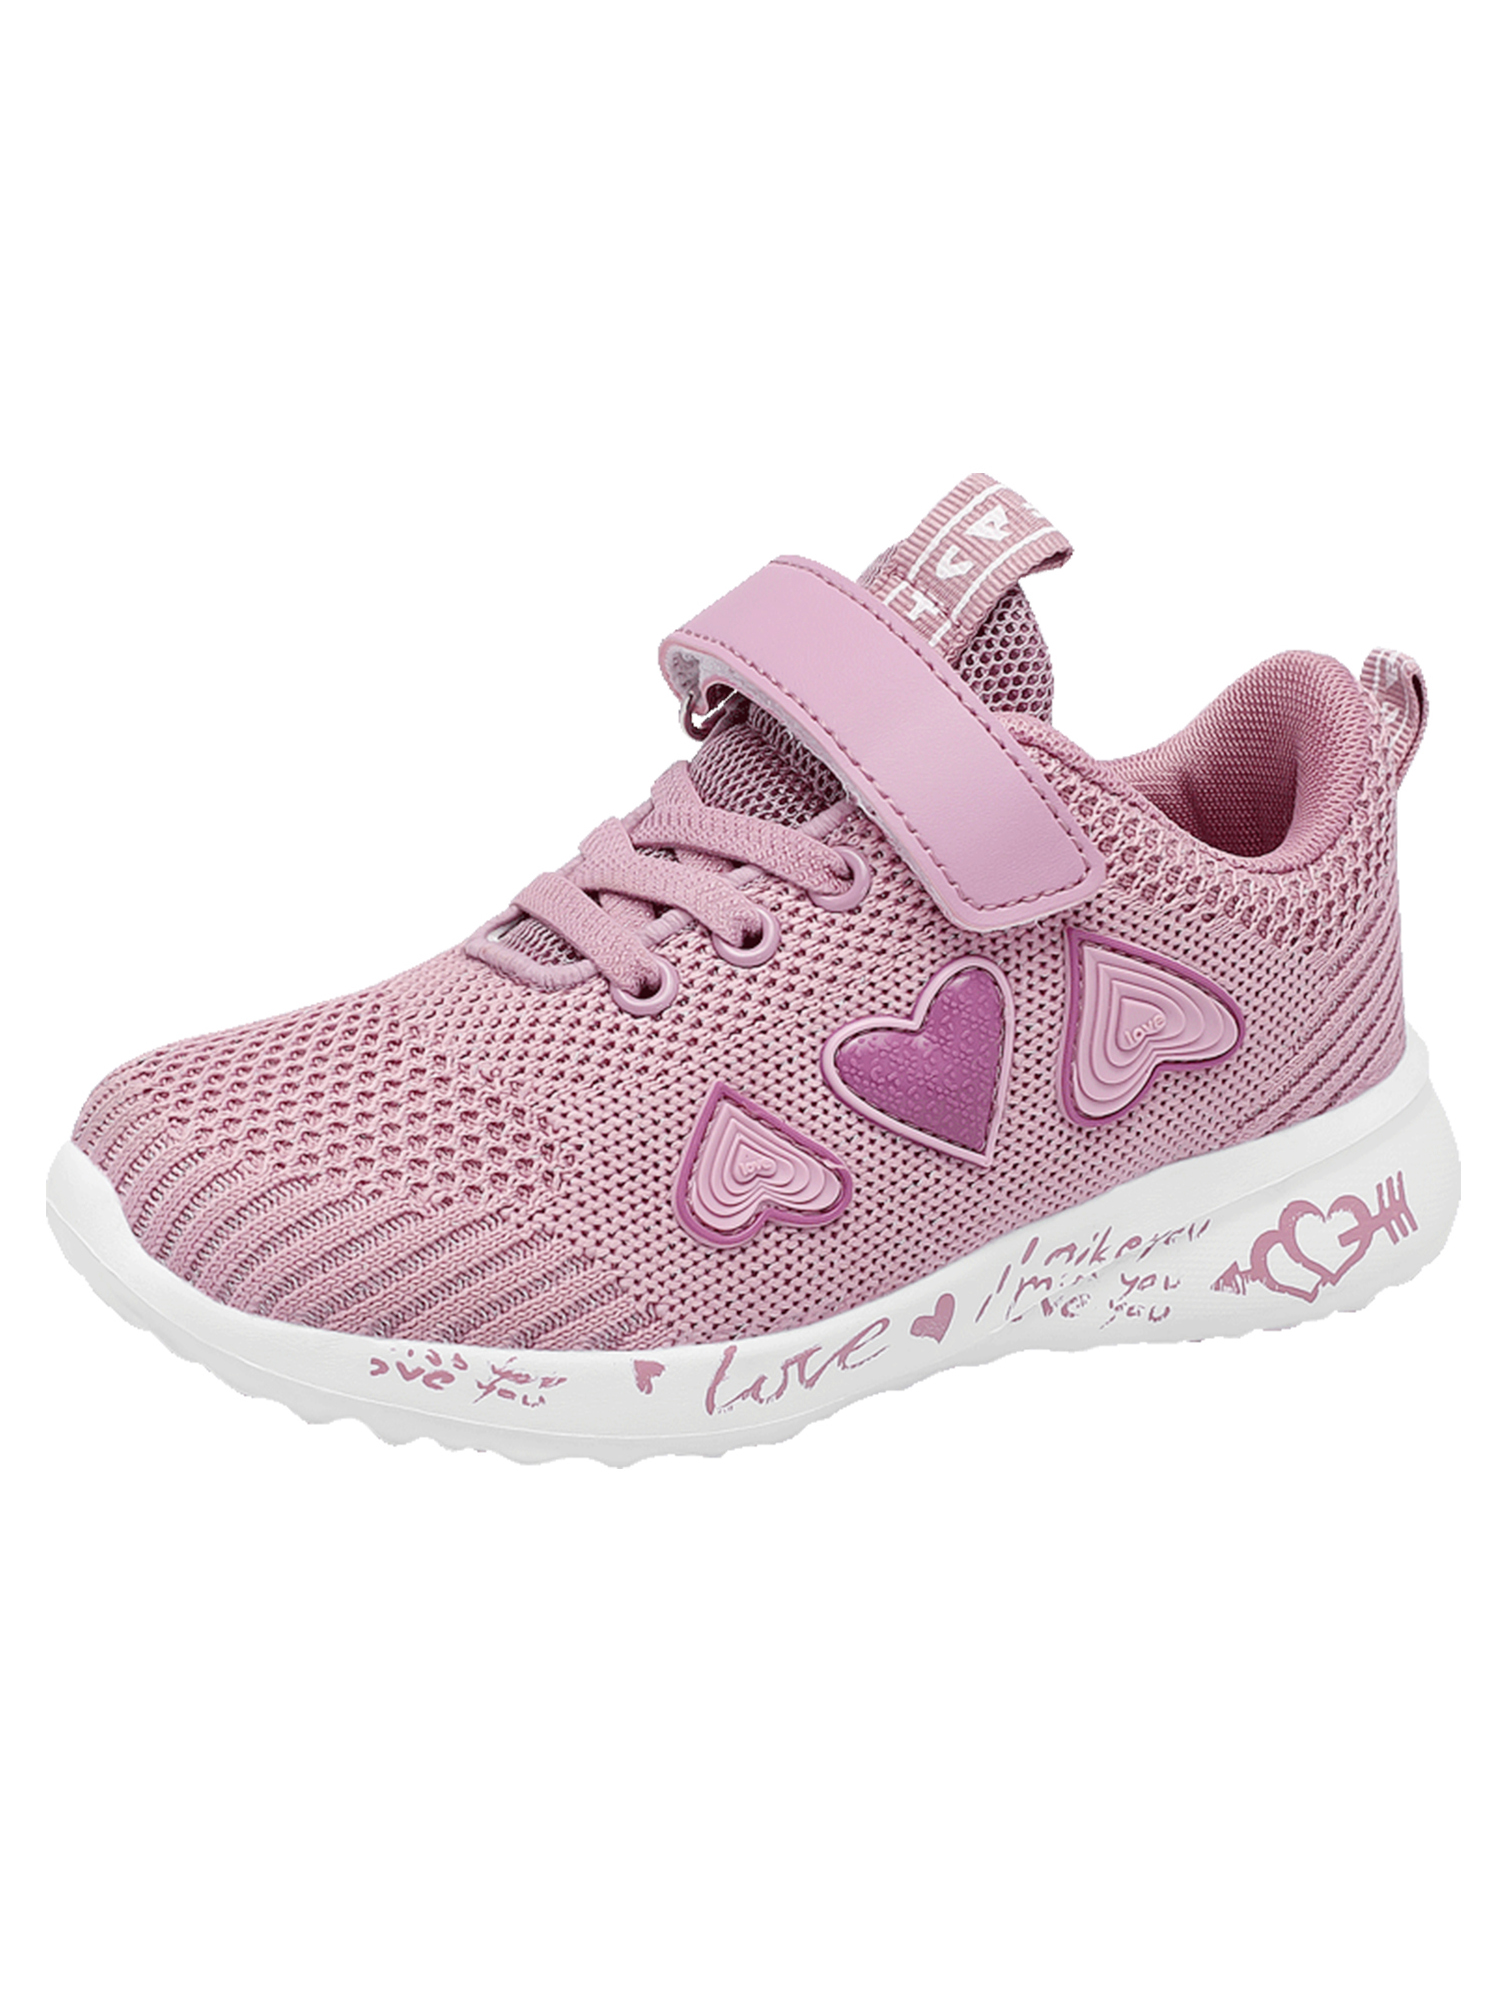 Tanleewa Lovely Girls Sports Shoes Kids Breathable Sneakers Lightweight Casual Shoe Size 13 - image 4 of 7